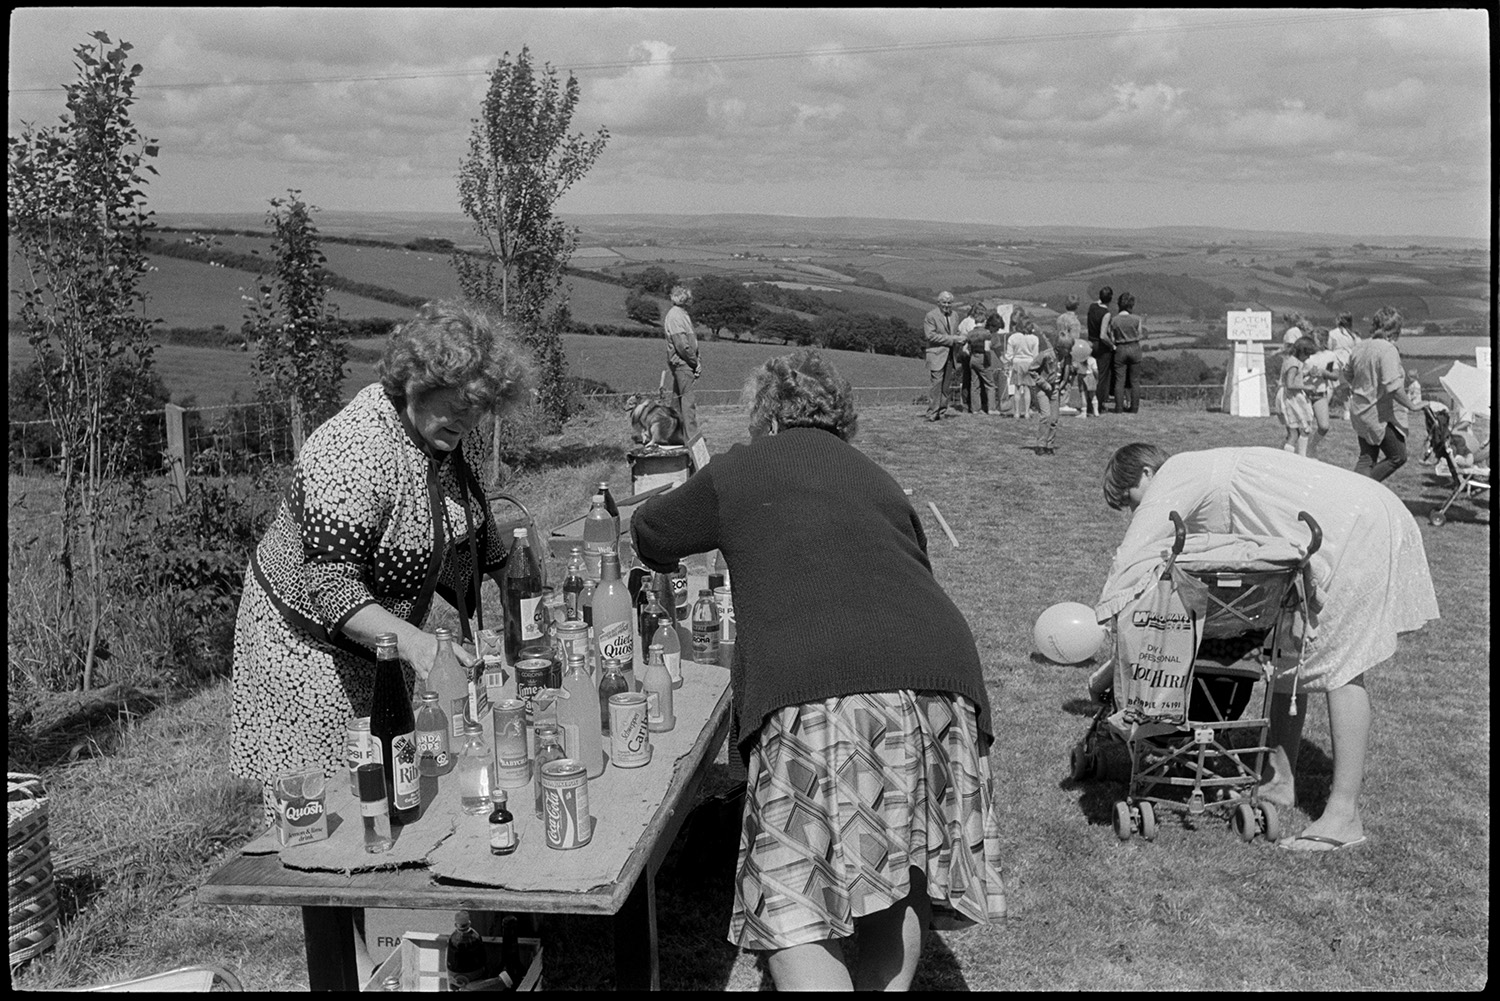 Fete stalls, games, majorettes. 
[Women organising the bottle stall at Atherington church fete held at the vicarage. A women is tending to a child in a pram next to the stall. Other games and stalls can be seen in the background.]